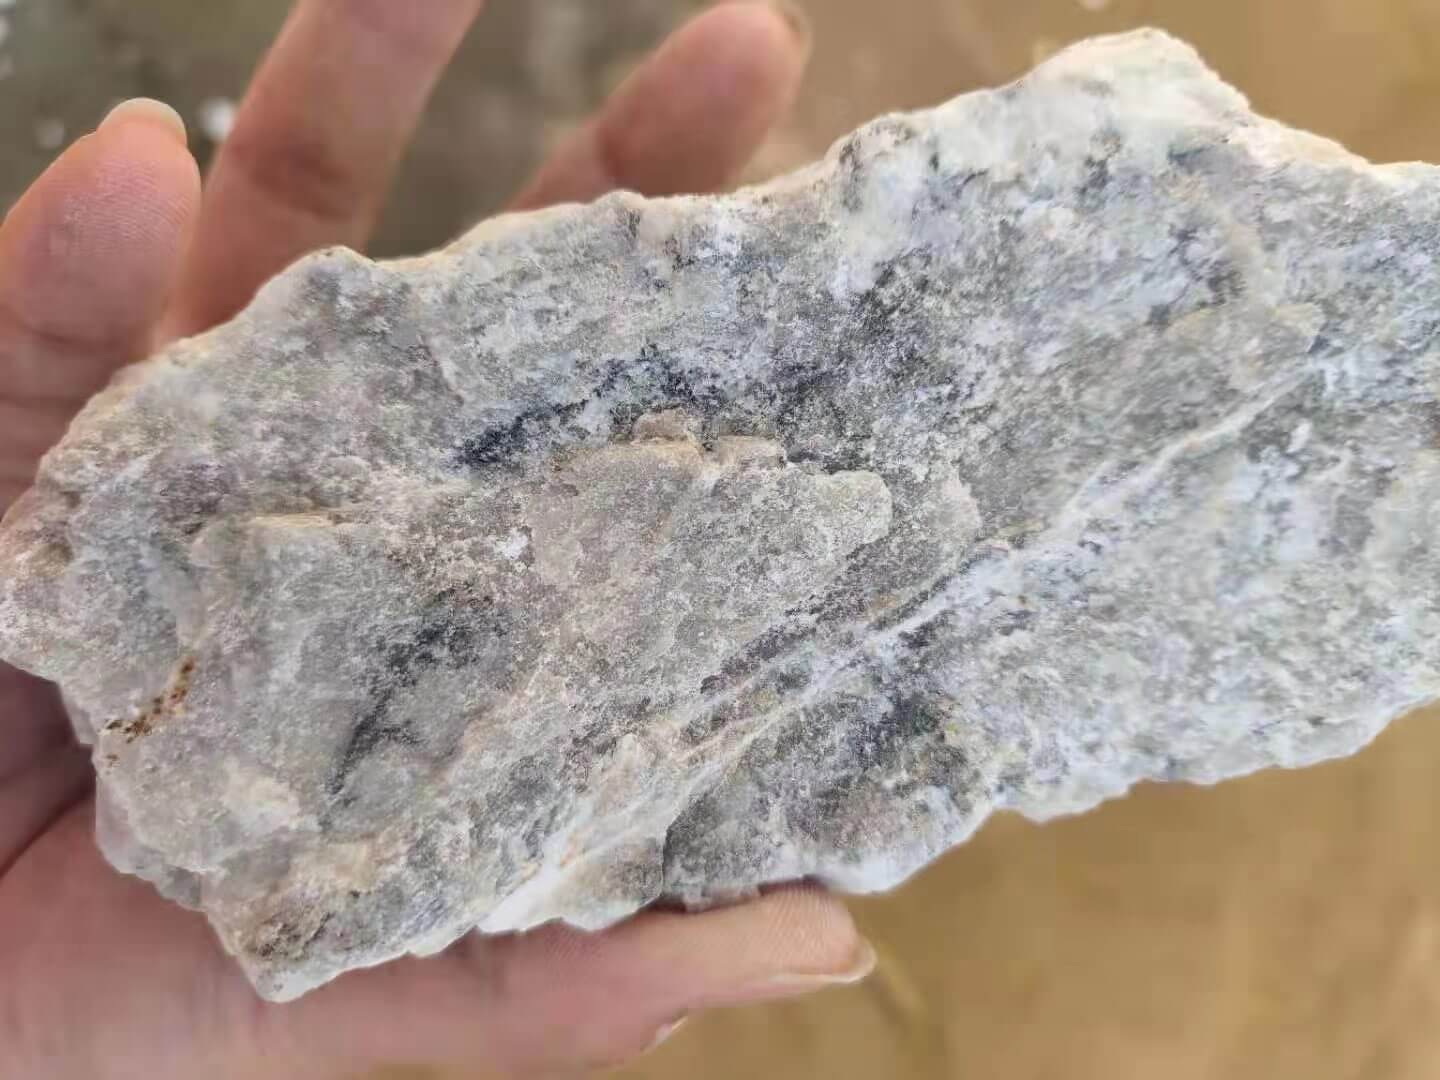 lepidolite1 - Can lithium carbonate be extracted from lepidolite in industry?